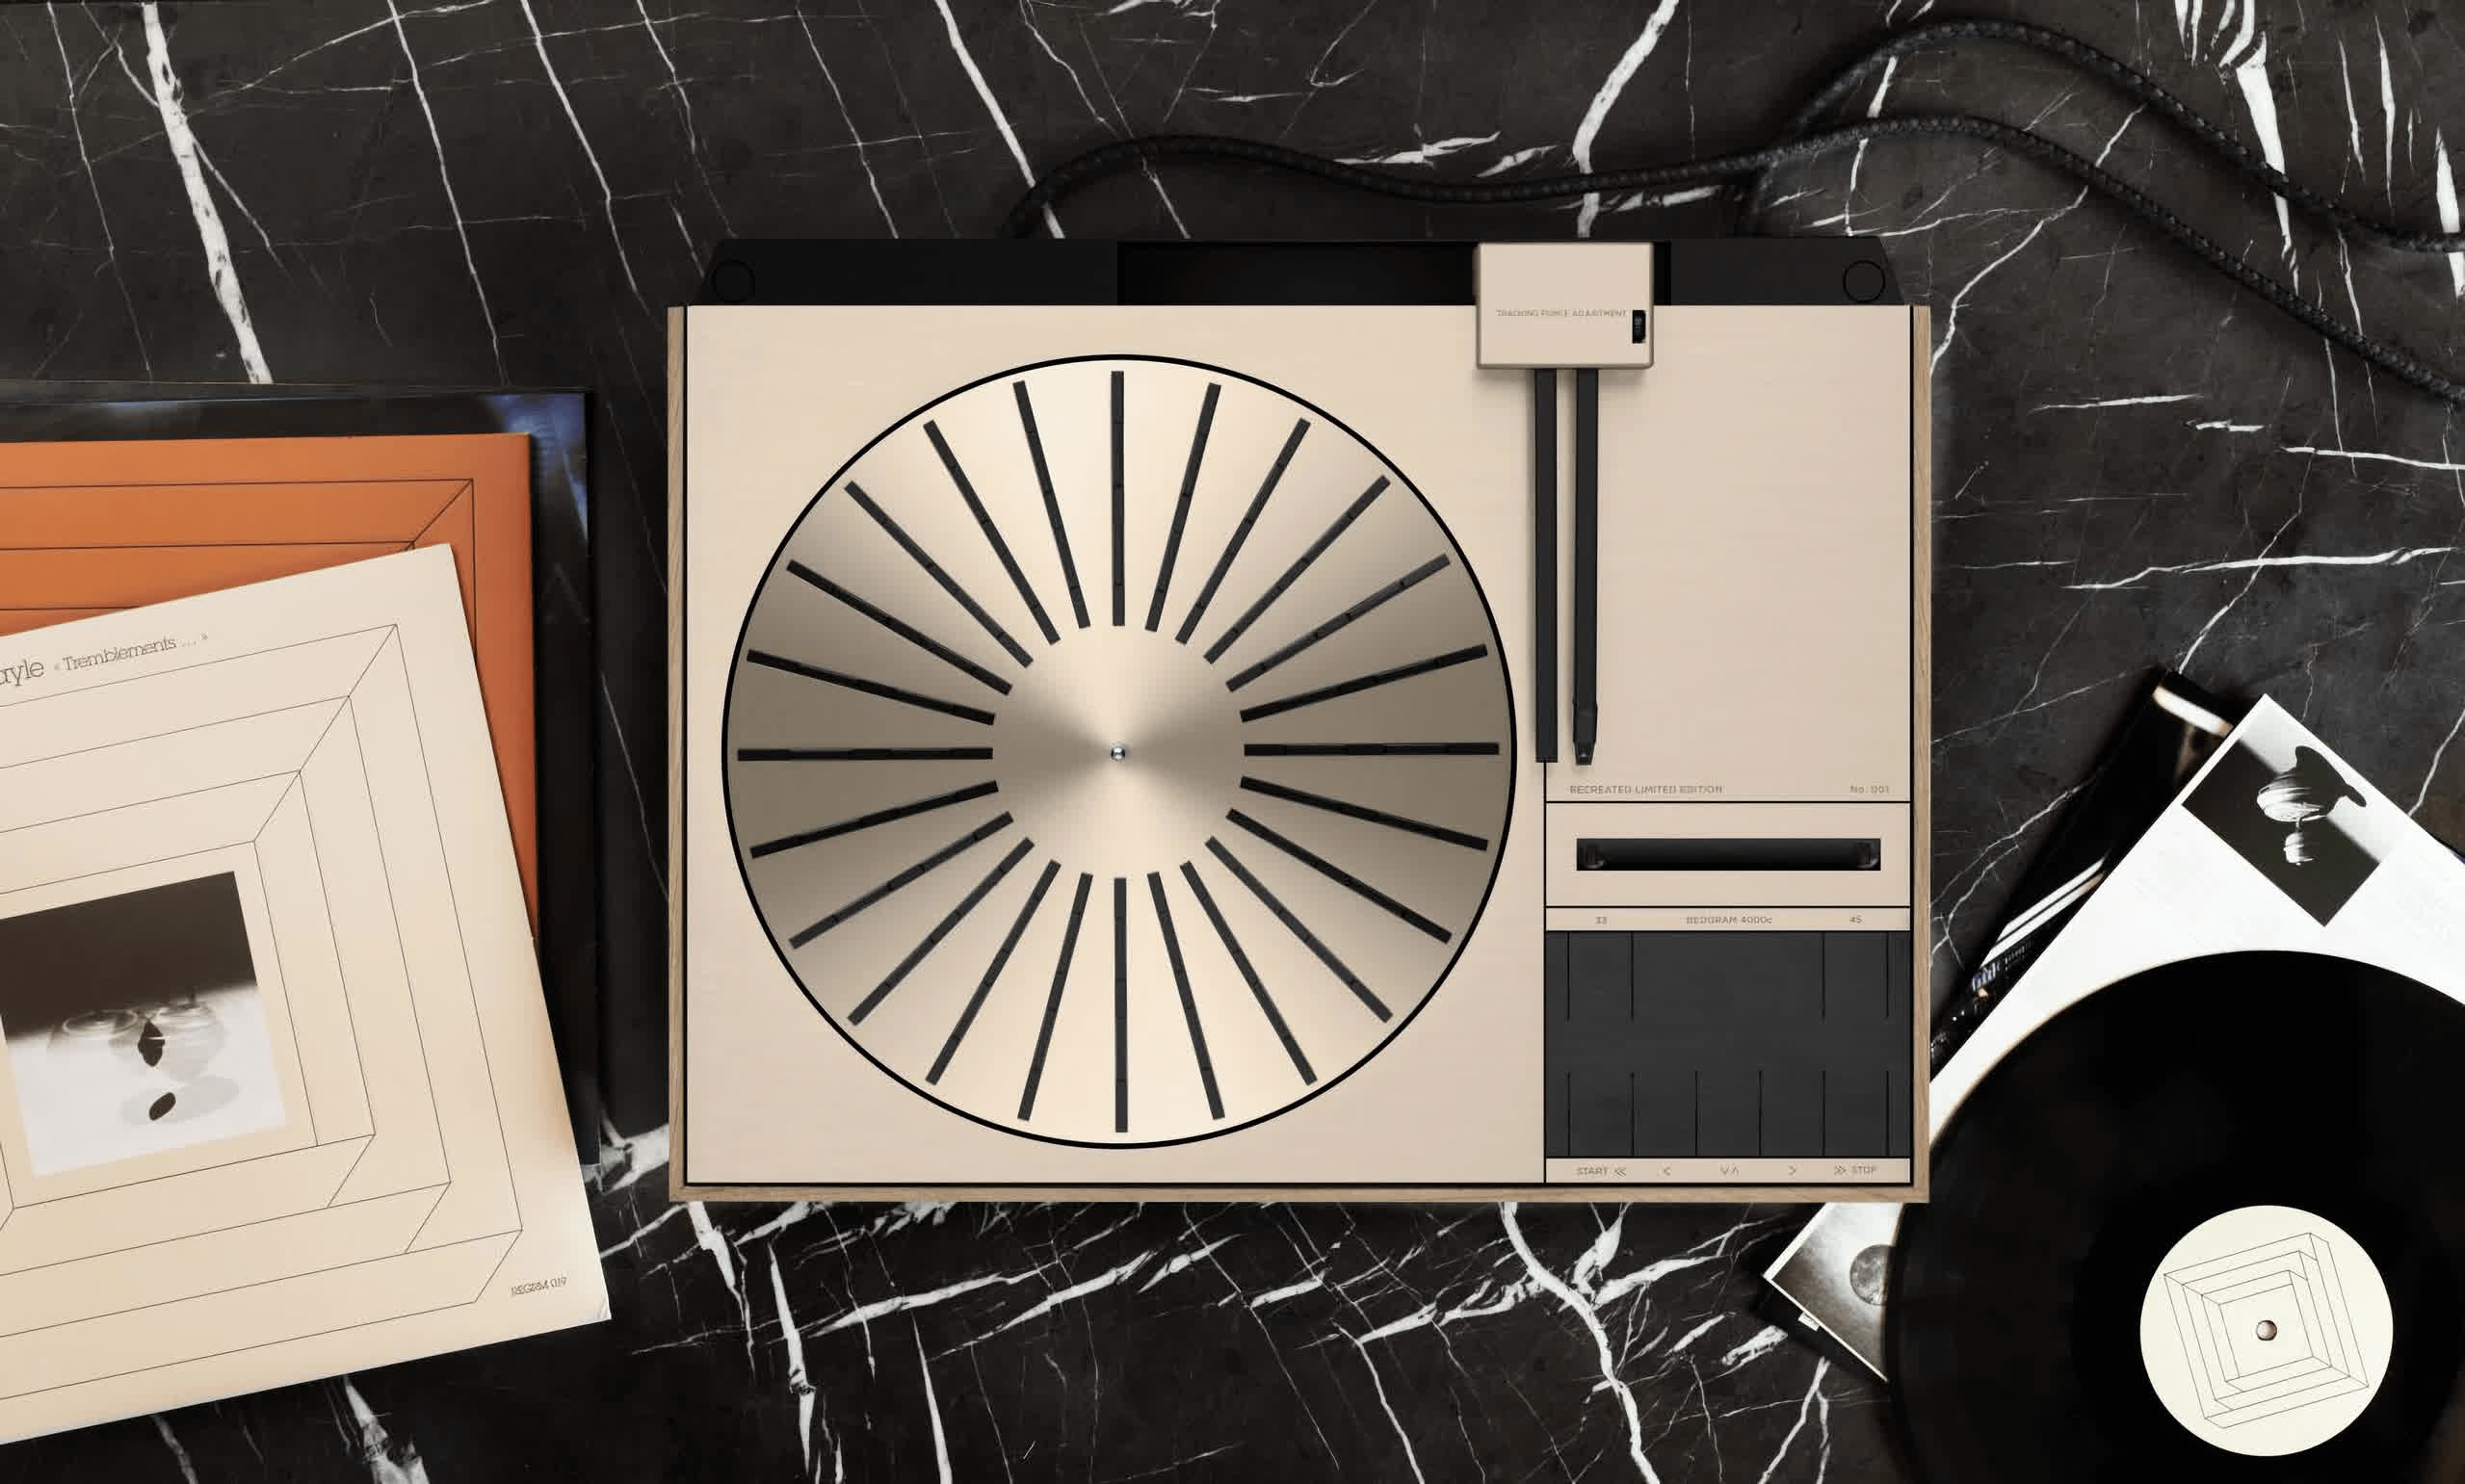 Bang & Olufsen is bringing back a turntable from the 70s